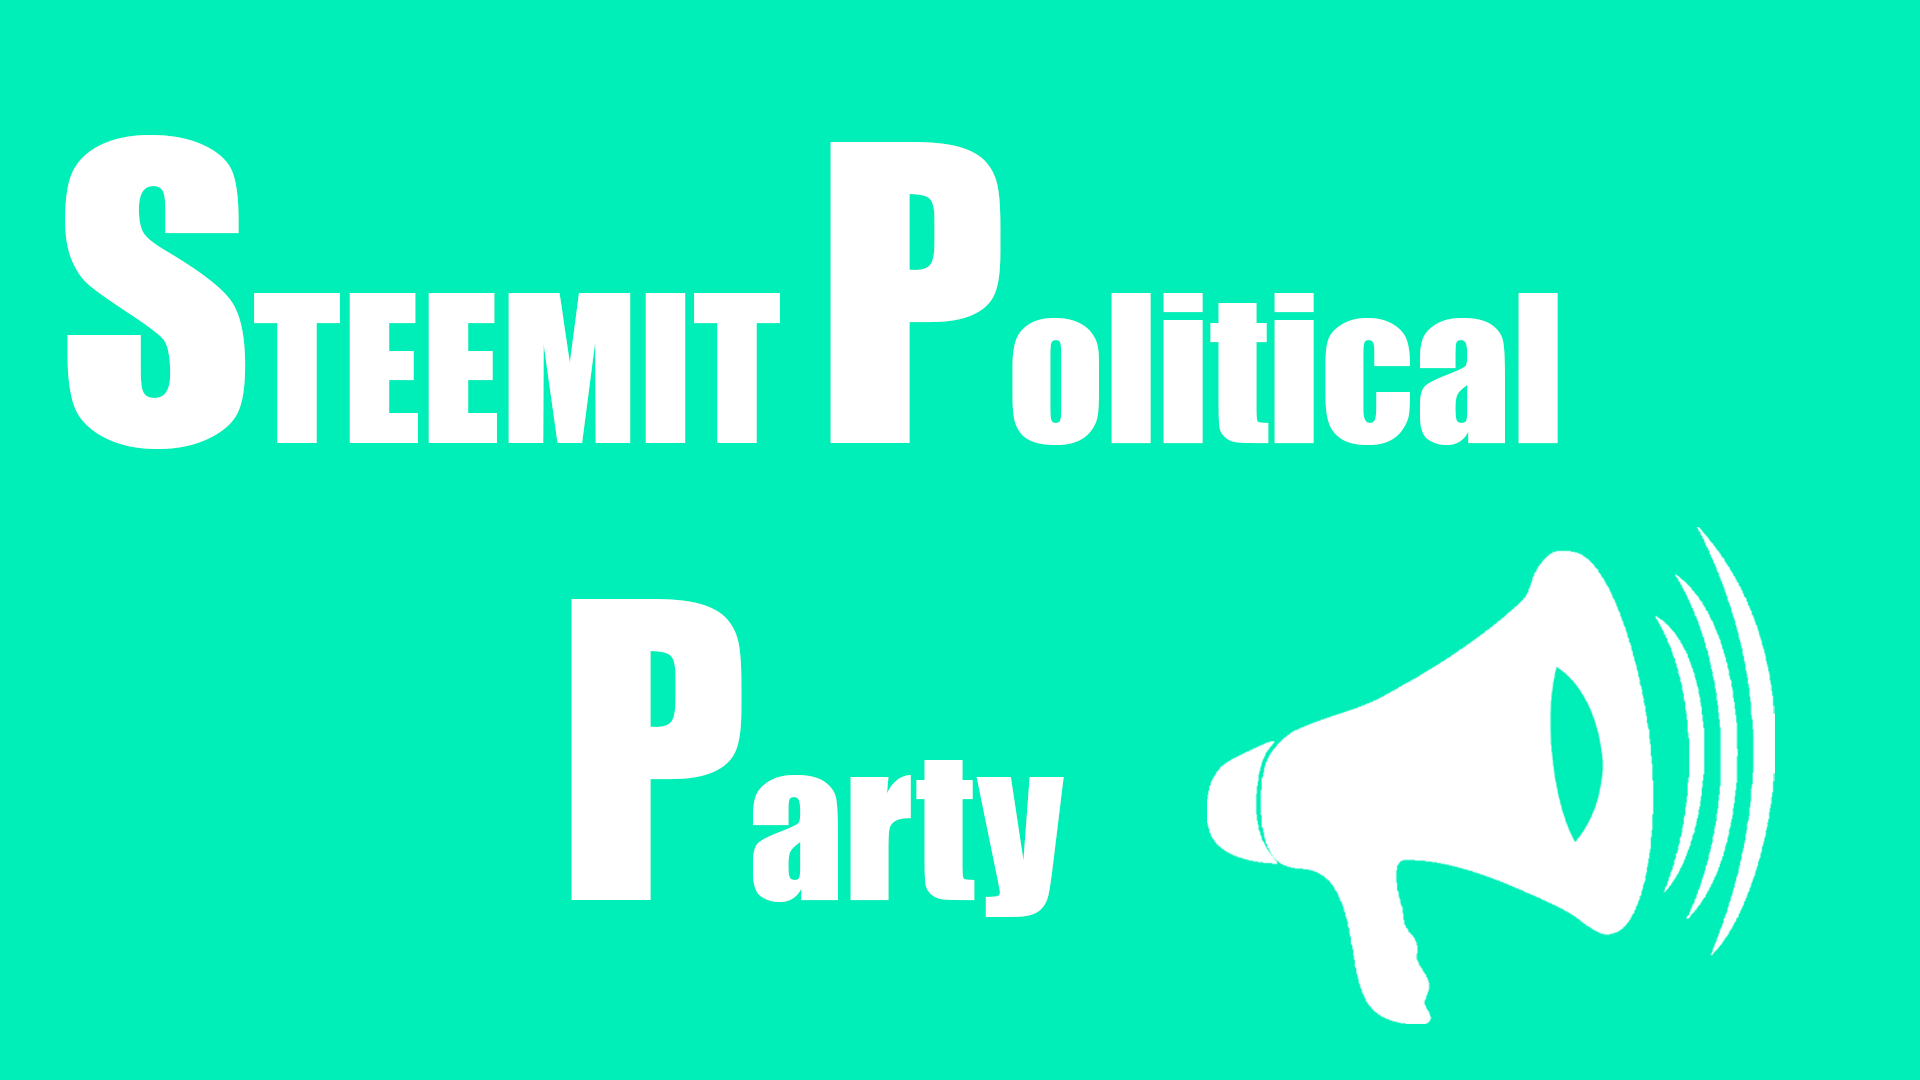 steemit politcal party logo.png